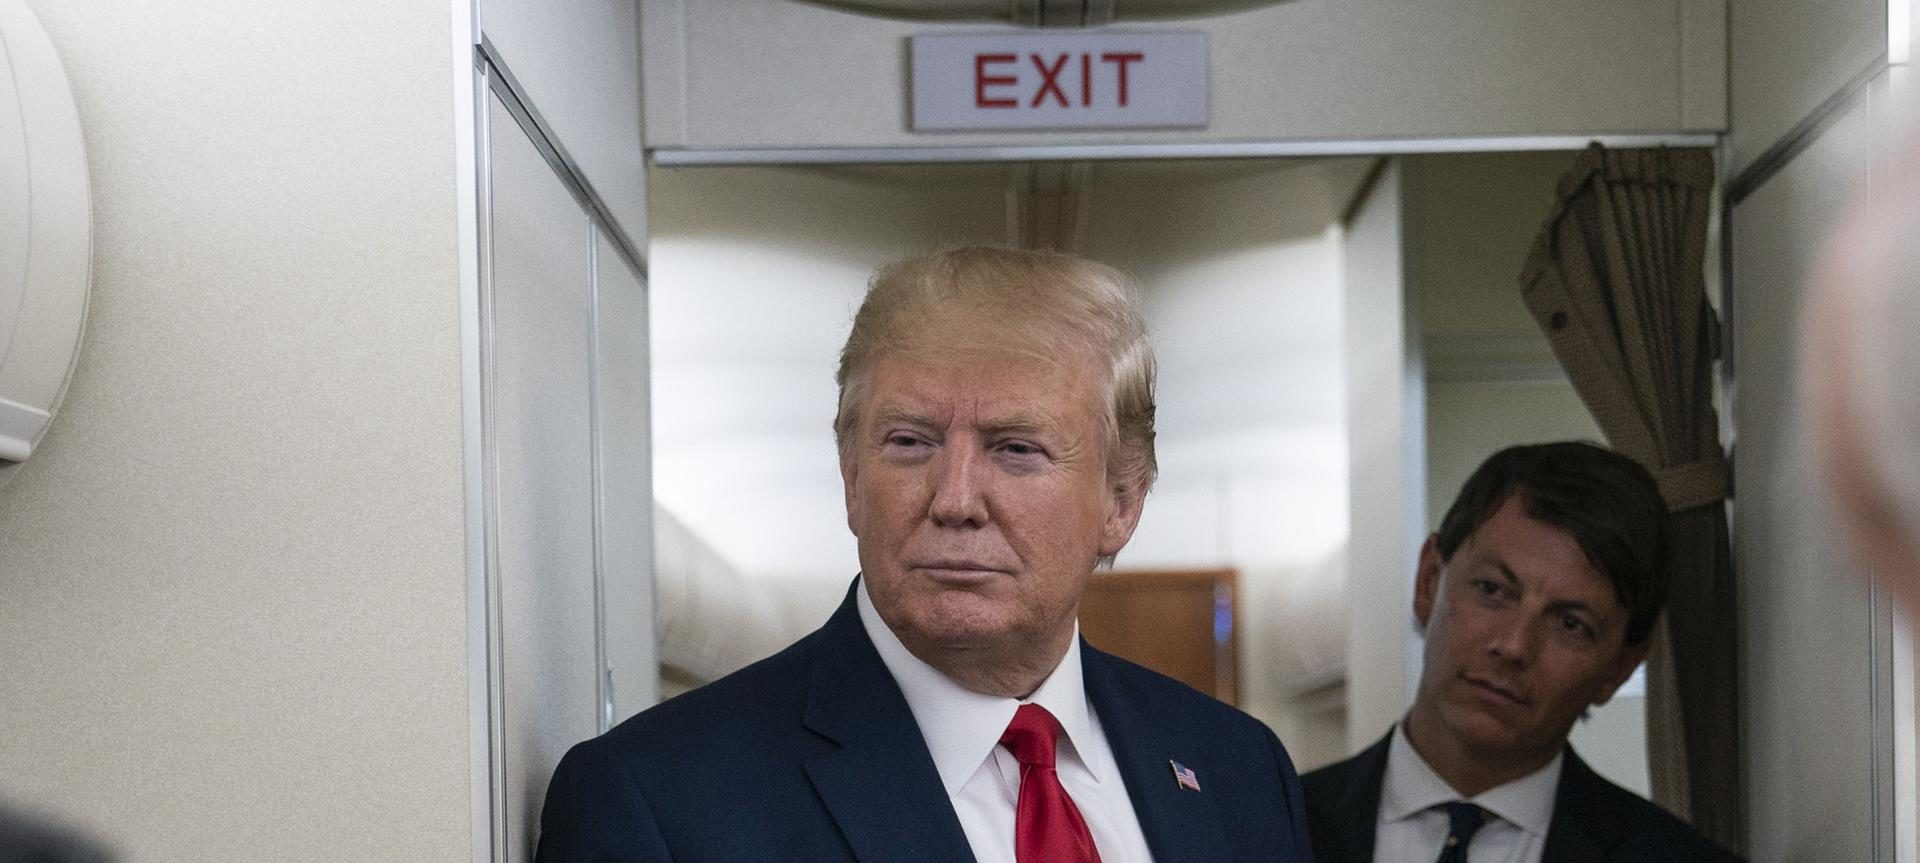 Donald Trump with sign Exit